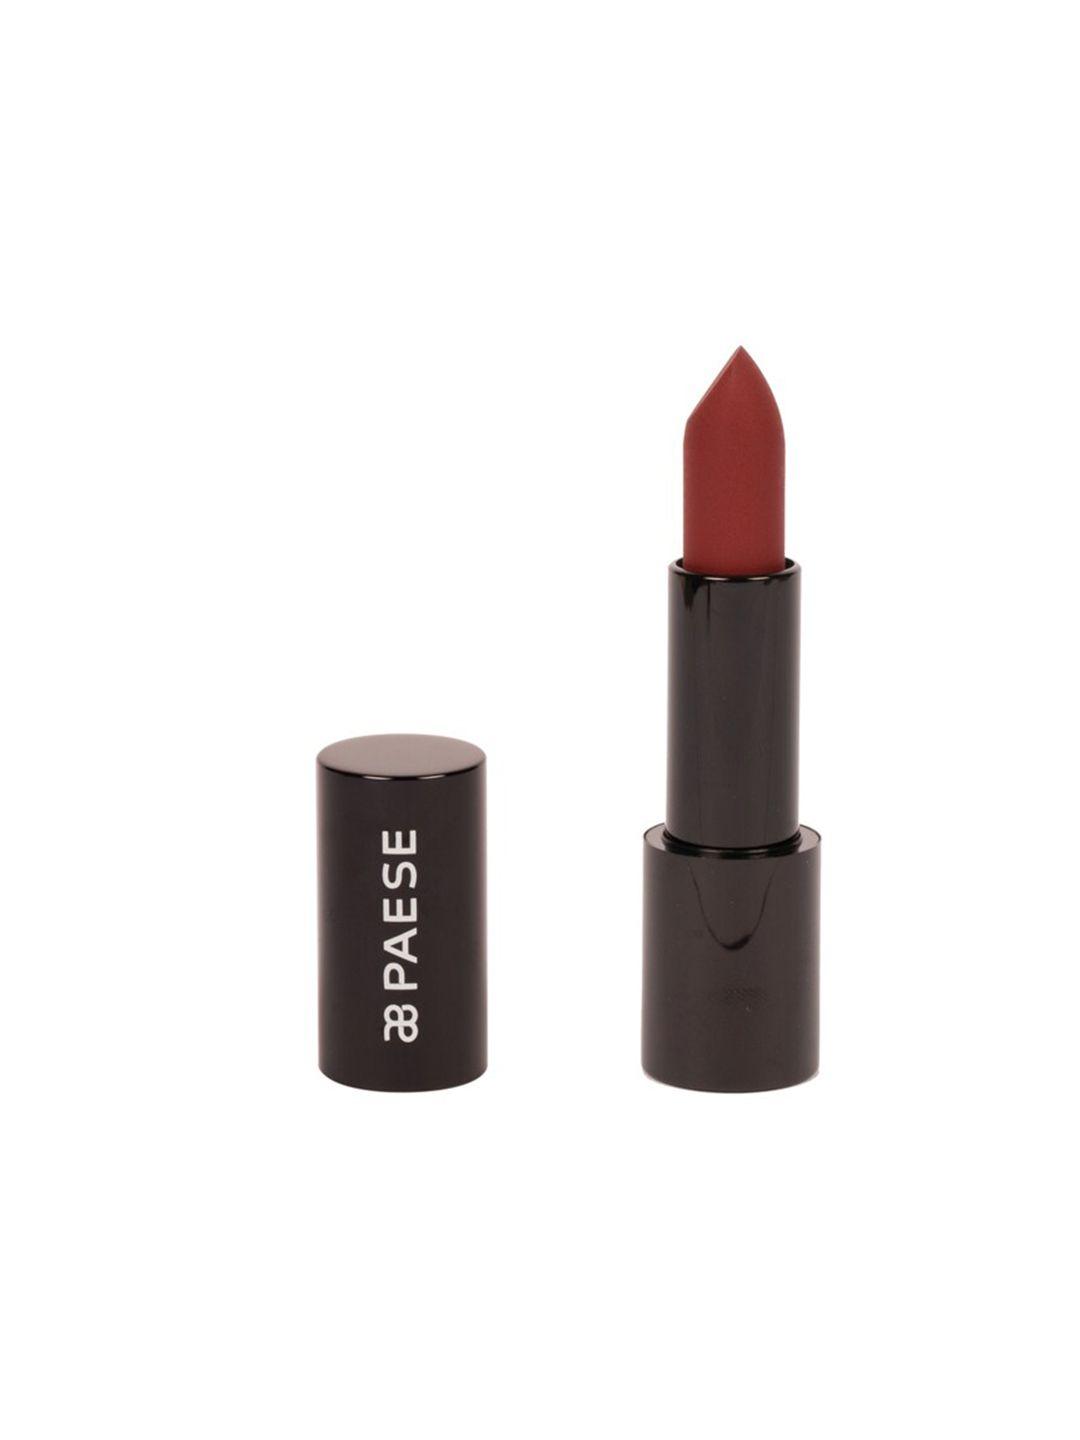 paese cosmetics mattologie matte lipstick with rice oil 4.3 g - well red 102